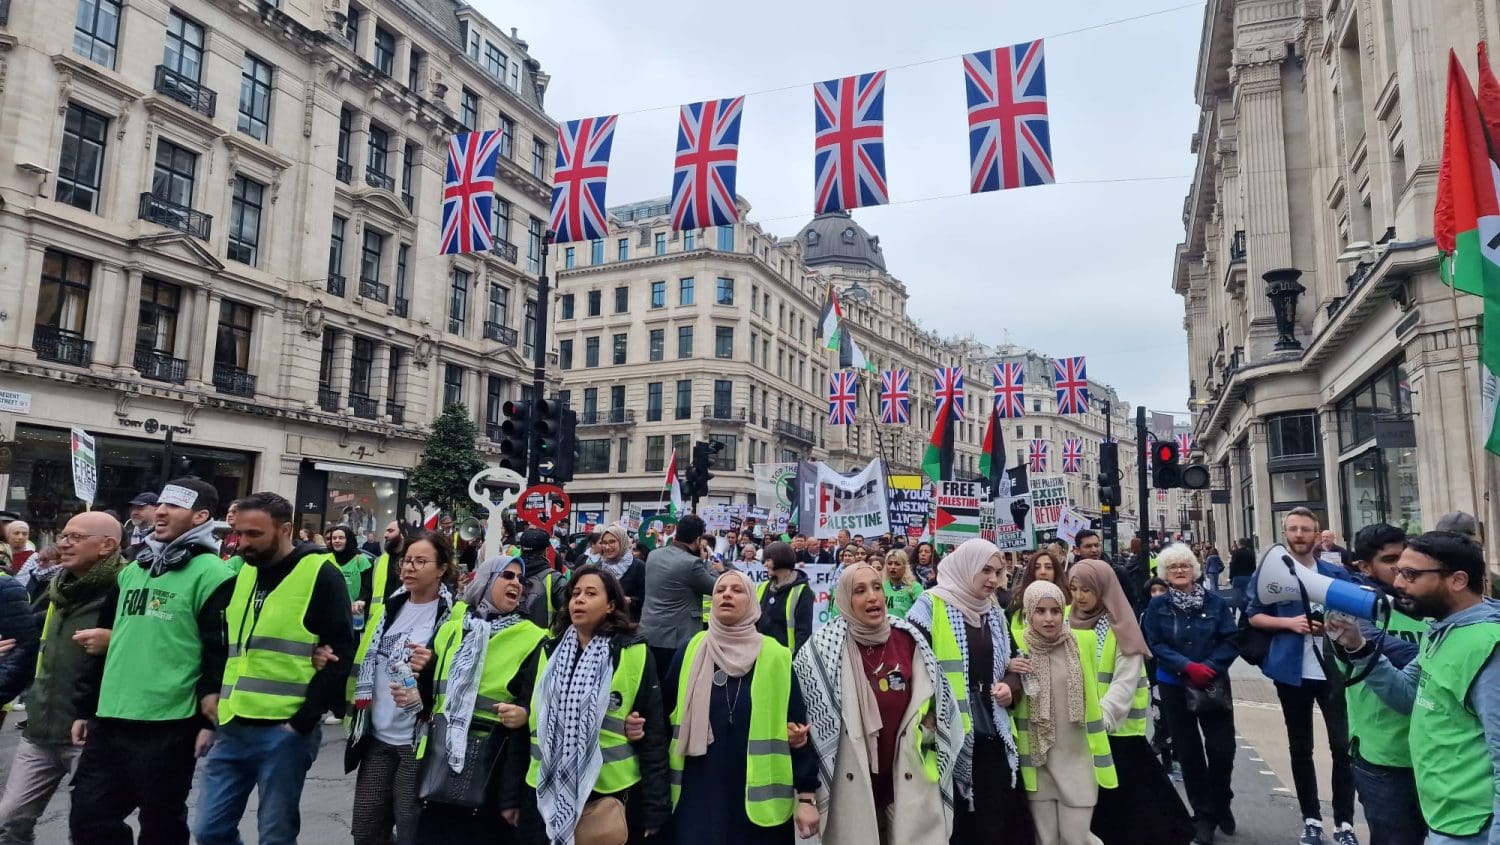 Palestinians and their supporters marking Nakba day in London